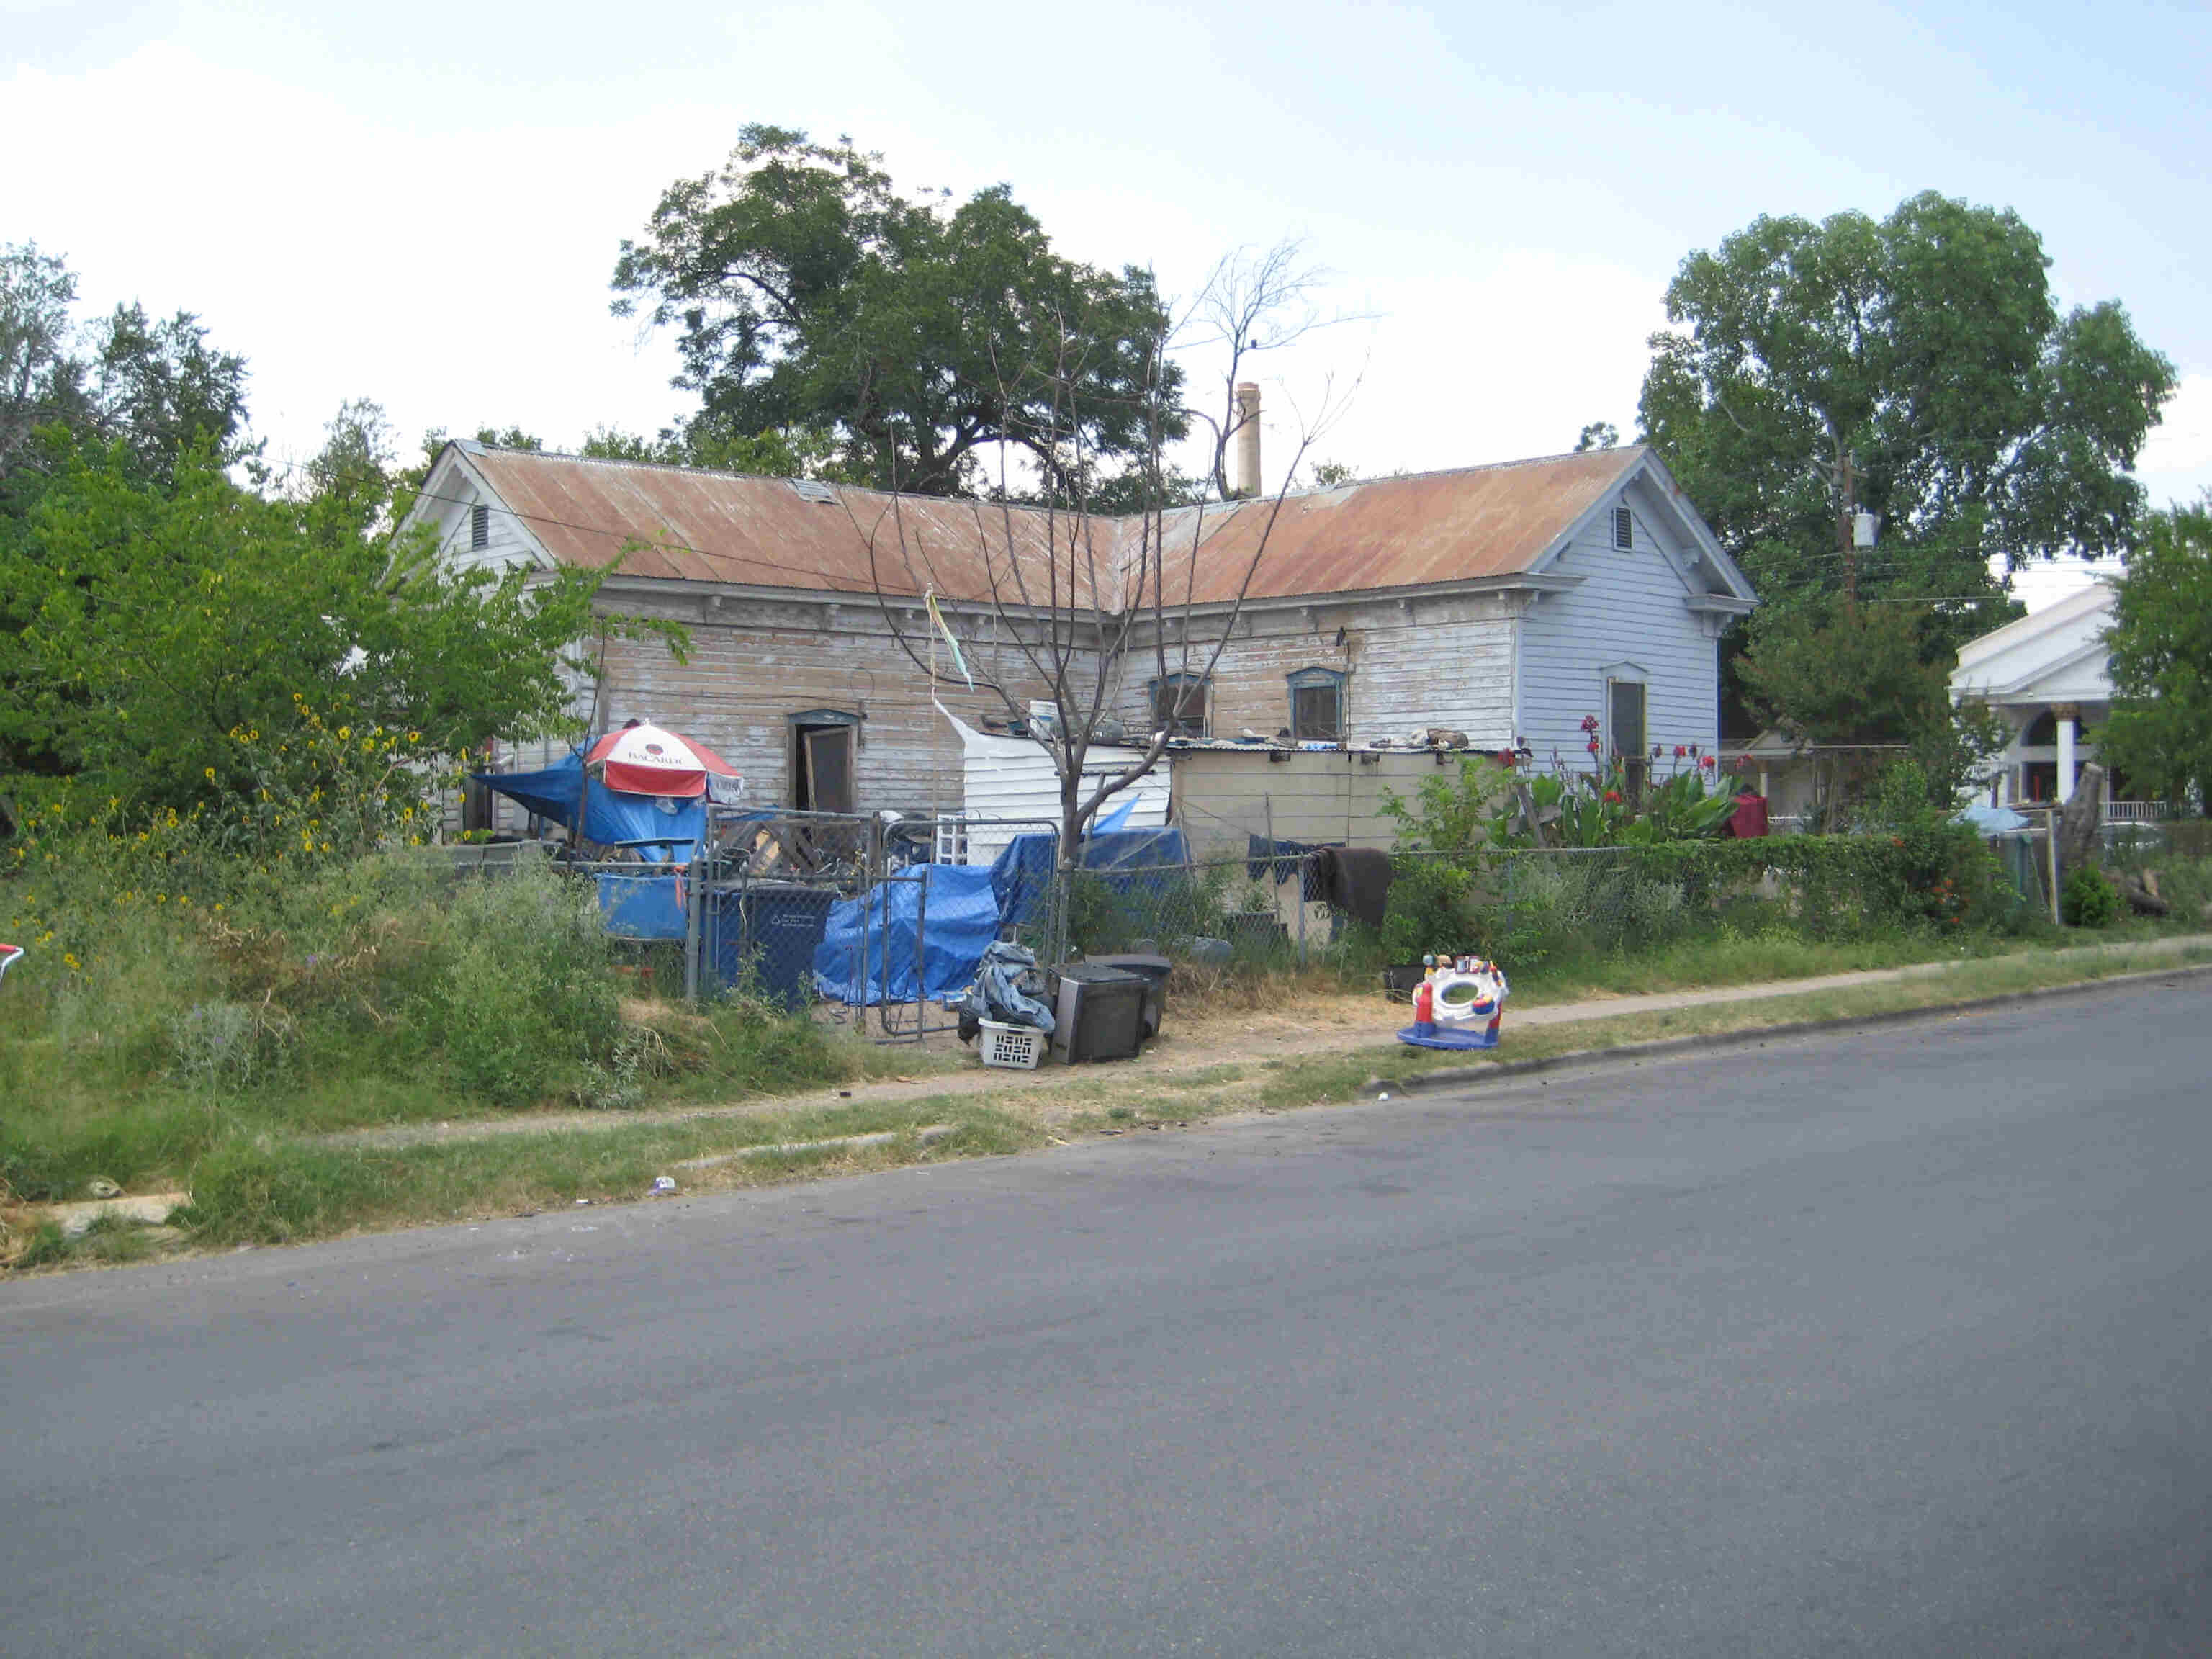 Street view of a house with a rusty steel roof, with a fenced yard full of weeds and junk